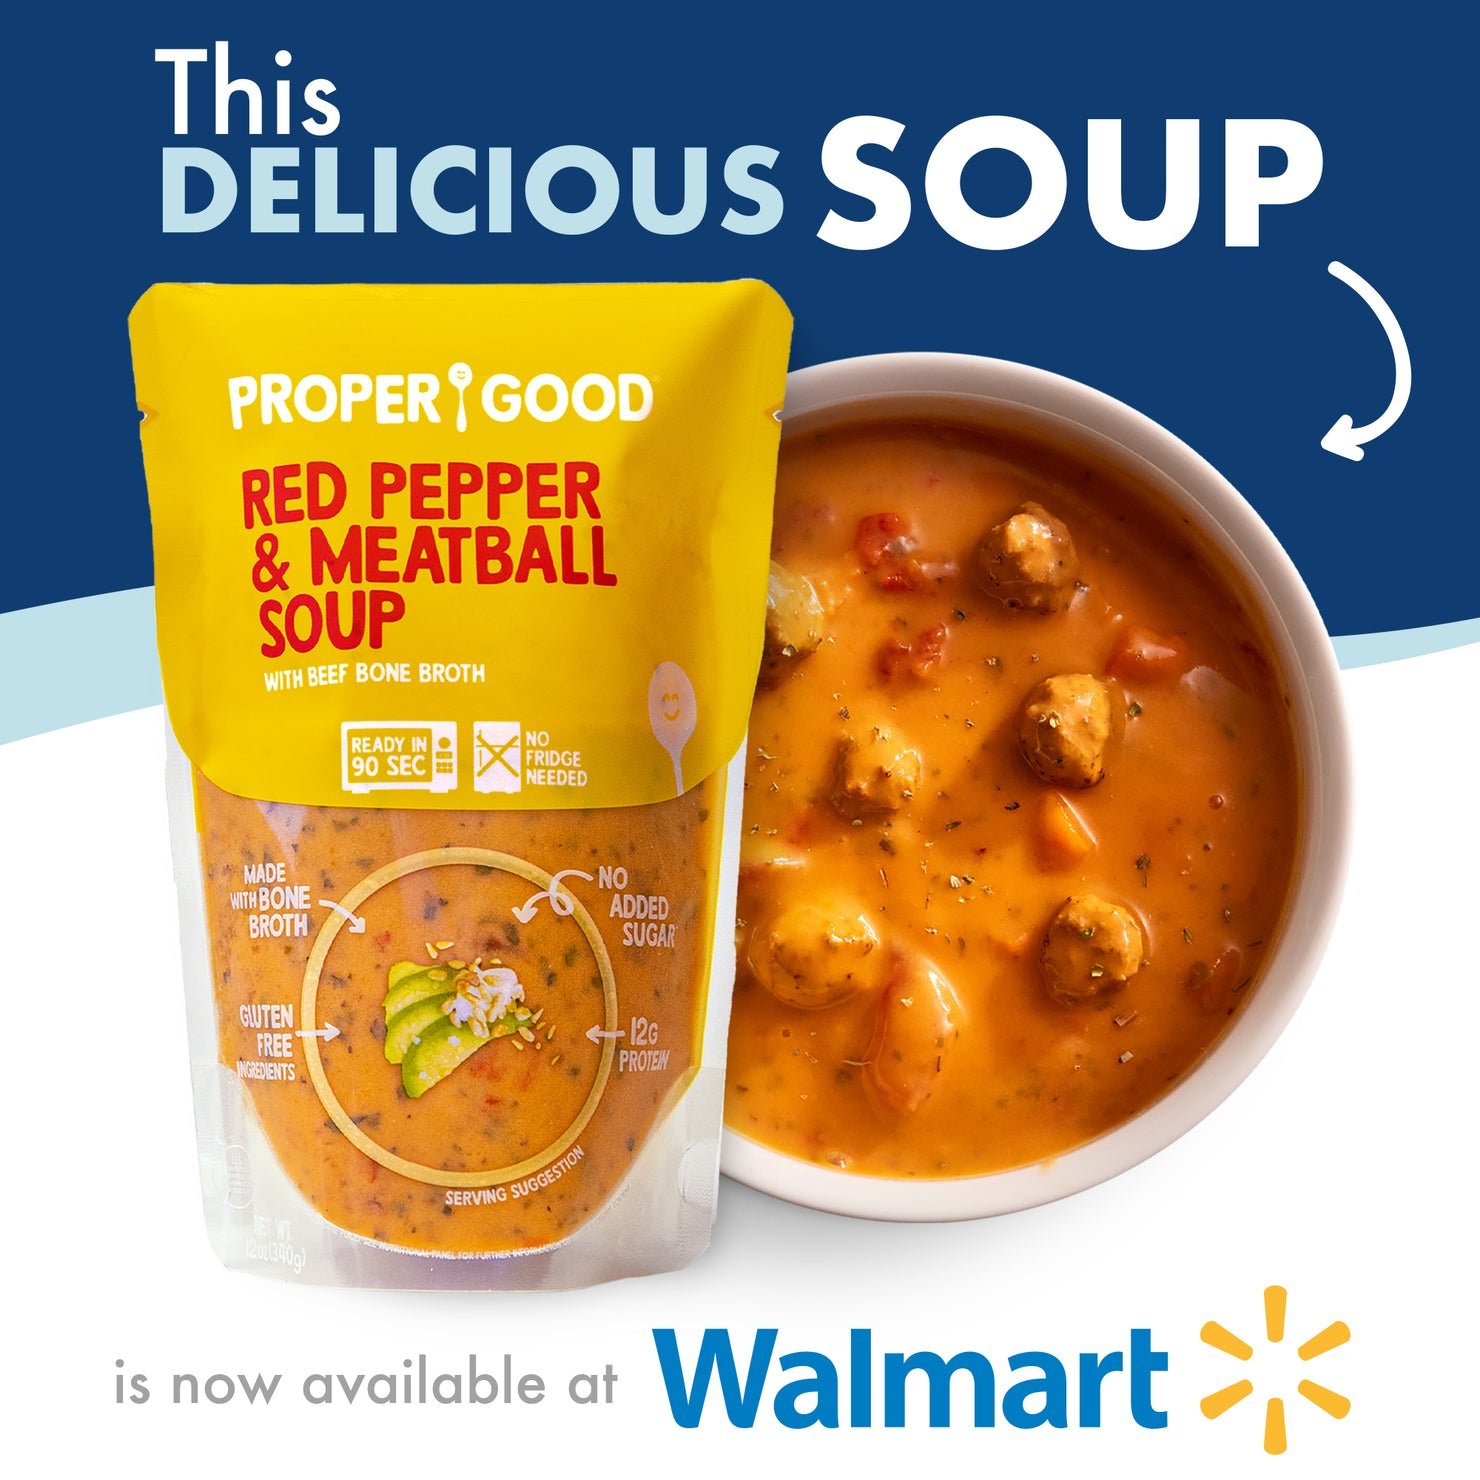 Red Pepper & Meatball Soup available in Walmart - Eat Proper Good